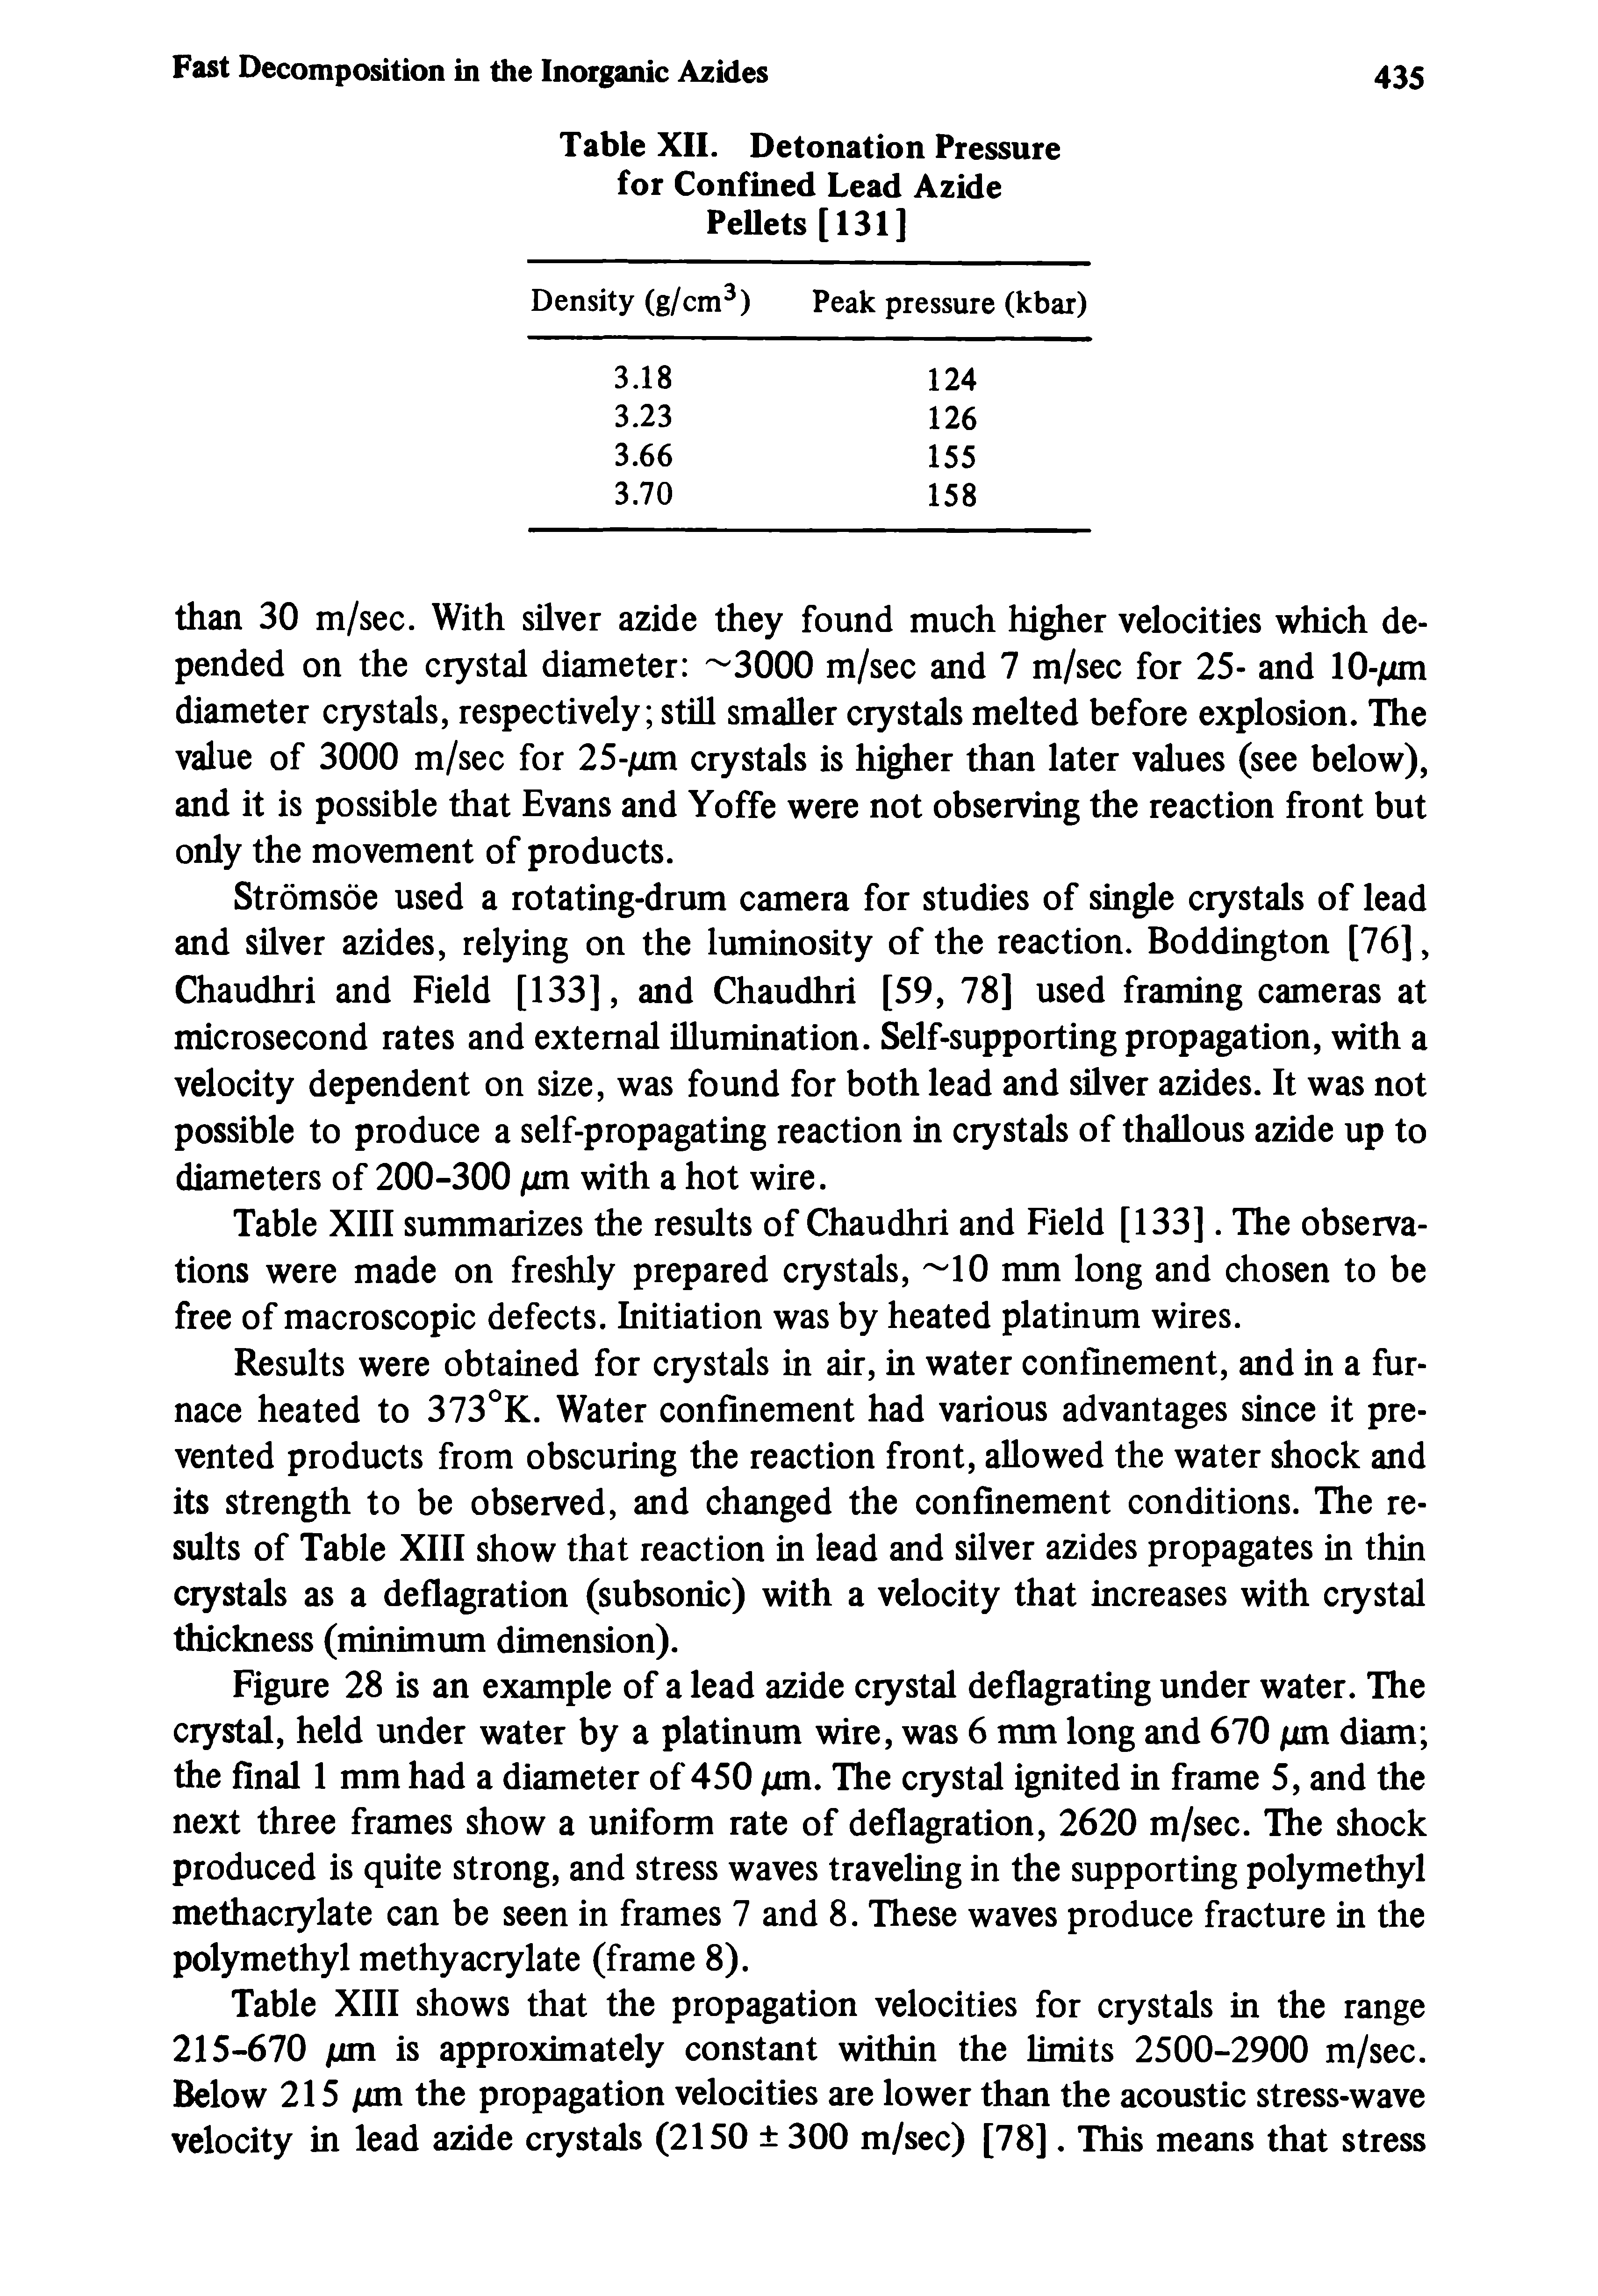 Table XIII summarizes the results of Chaudhri and Field [133]. The observations were made on freshly prepared crystals, 10 mm long and chosen to be free of macroscopic defects. Initiation was by heated platinum wires.